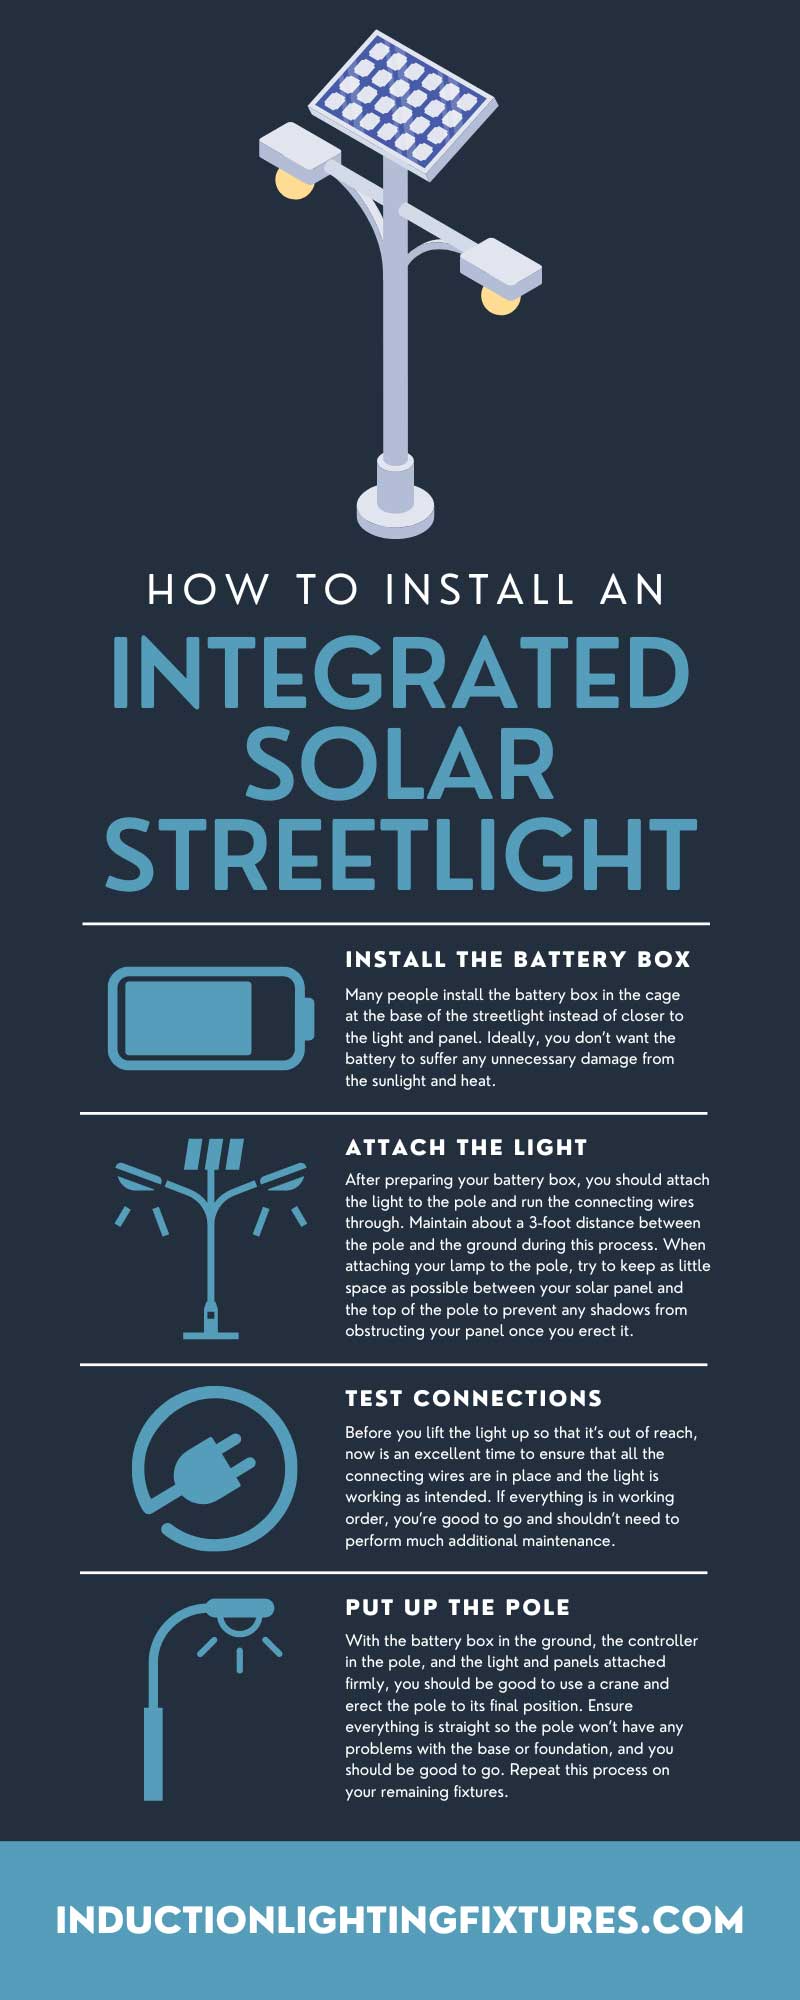 How To Install an Integrated Solar Streetlight